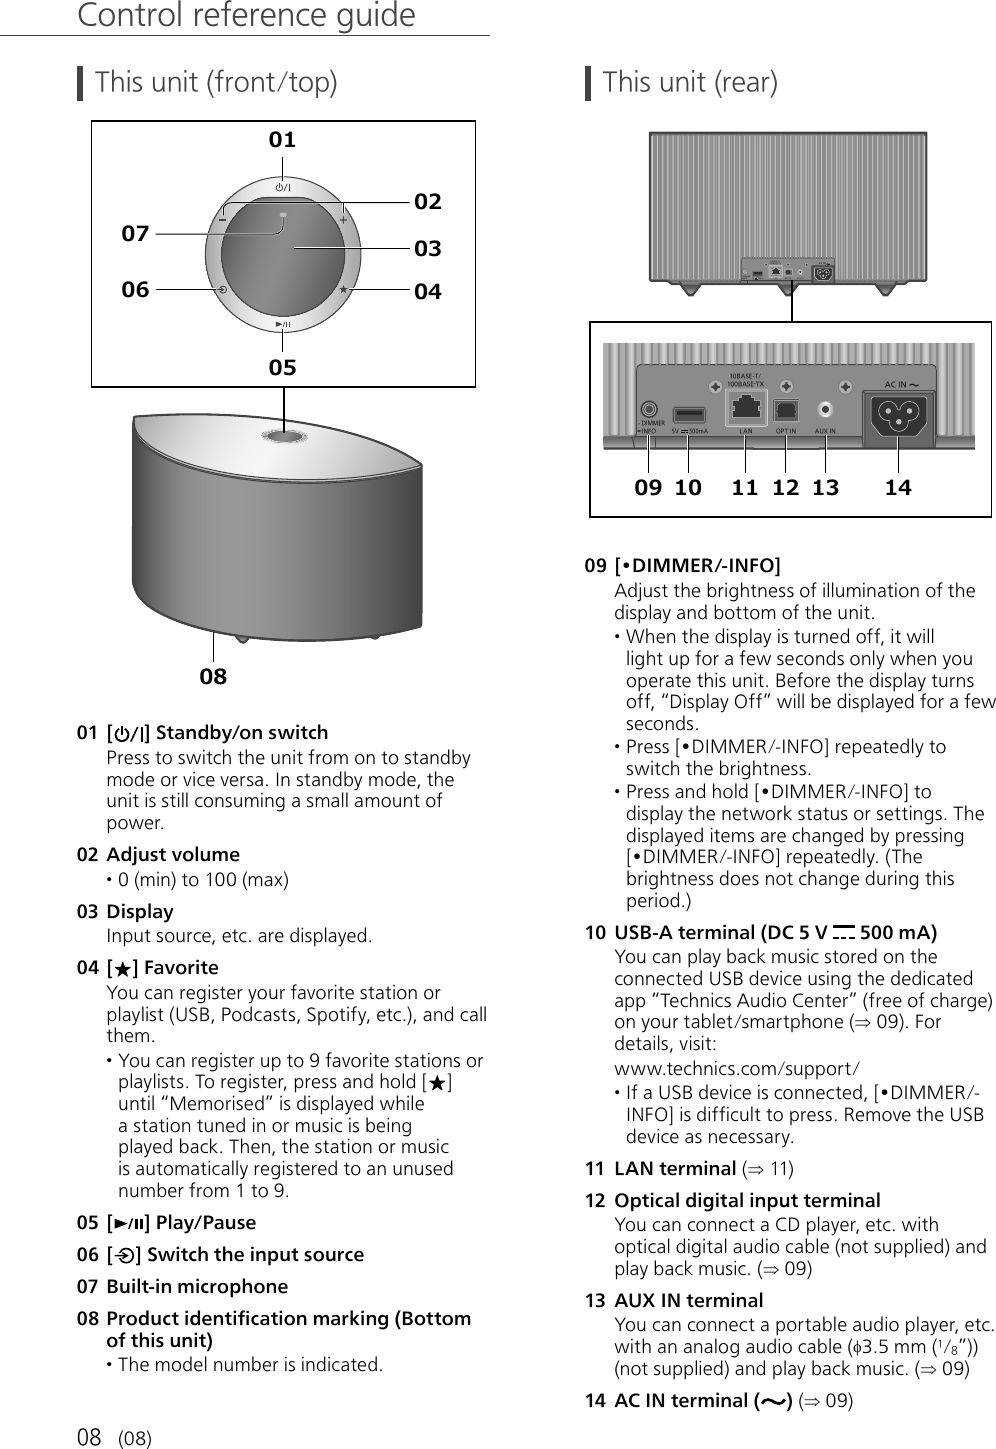 08   Control reference guide (08) This unit (front/top)  01  [] Standby/on switch Press to switch the unit from on to standby mode or vice versa. In standby mode, the unit is still consuming a small amount of power. 02  Adjust volume • 0 (min) to 100 (max) 03  Display Input source, etc. are displayed. 04  [ ] Favorite You can register your favorite station or playlist (USB, Podcasts, Spotify, etc.), and call them. • You can register up to 9 favorite stations or playlists. To register, press and hold [ ] until “Memorised” is displayed while a station tuned in or music is being played back. Then, the station or music is automatically registered to an unused number from 1 to 9. 05  [] Play/Pause 06  [] Switch the input source 07  Built-in microphone 08  Product identification marking (Bottom of this unit) • The model number is indicated. This unit (rear) 10BASE-T/100BASE -TXOPT INLAN AUX INDIMMERINFOAC IN500mA5V10BASE -T/100BASE-TXOPT INLAN AUX INDIMMERINFOAC IN500m A5V      09  [•D IMMER /- INFO] Adjust the brightness of illumination of the display and bottom of the unit. • When the display is turned off, it will light up for a few seconds only when you operate this unit. Before the display turns off, “Display Off” will be displayed for a few seconds. • Press [•DIMMER/-INFO] repeatedly to switch the brightness. • Press and hold [•DIMMER/-INFO] to display the network status or settings. The displayed items are changed by pressing [•DIMMER/-INFO] repeatedly. (The brightness does not change during this period.) 10  USB-A terminal (DC 5 V   500 mA) You can play back music stored on the connected USB device using the dedicated app “Technics Audio Center” (free of charge) on your tablet/smartphone ( 09). For details, visit: www.technics.com/support/ • If a USB device is connected, [•DIMMER/-INFO] is difficult to press. Remove the USB device as necessary. 11  LAN terminal ( 11) 12  Optical digital input terminal You can connect a CD player, etc. with optical digital audio cable (not supplied) and play back music. ( 09) 13  AUX IN terminal You can connect a portable audio player, etc. with an analog audio cable (3.5 mm (1/8”)) (not supplied) and play back music. ( 09) 14  AC IN terminal ( ) ( 09)